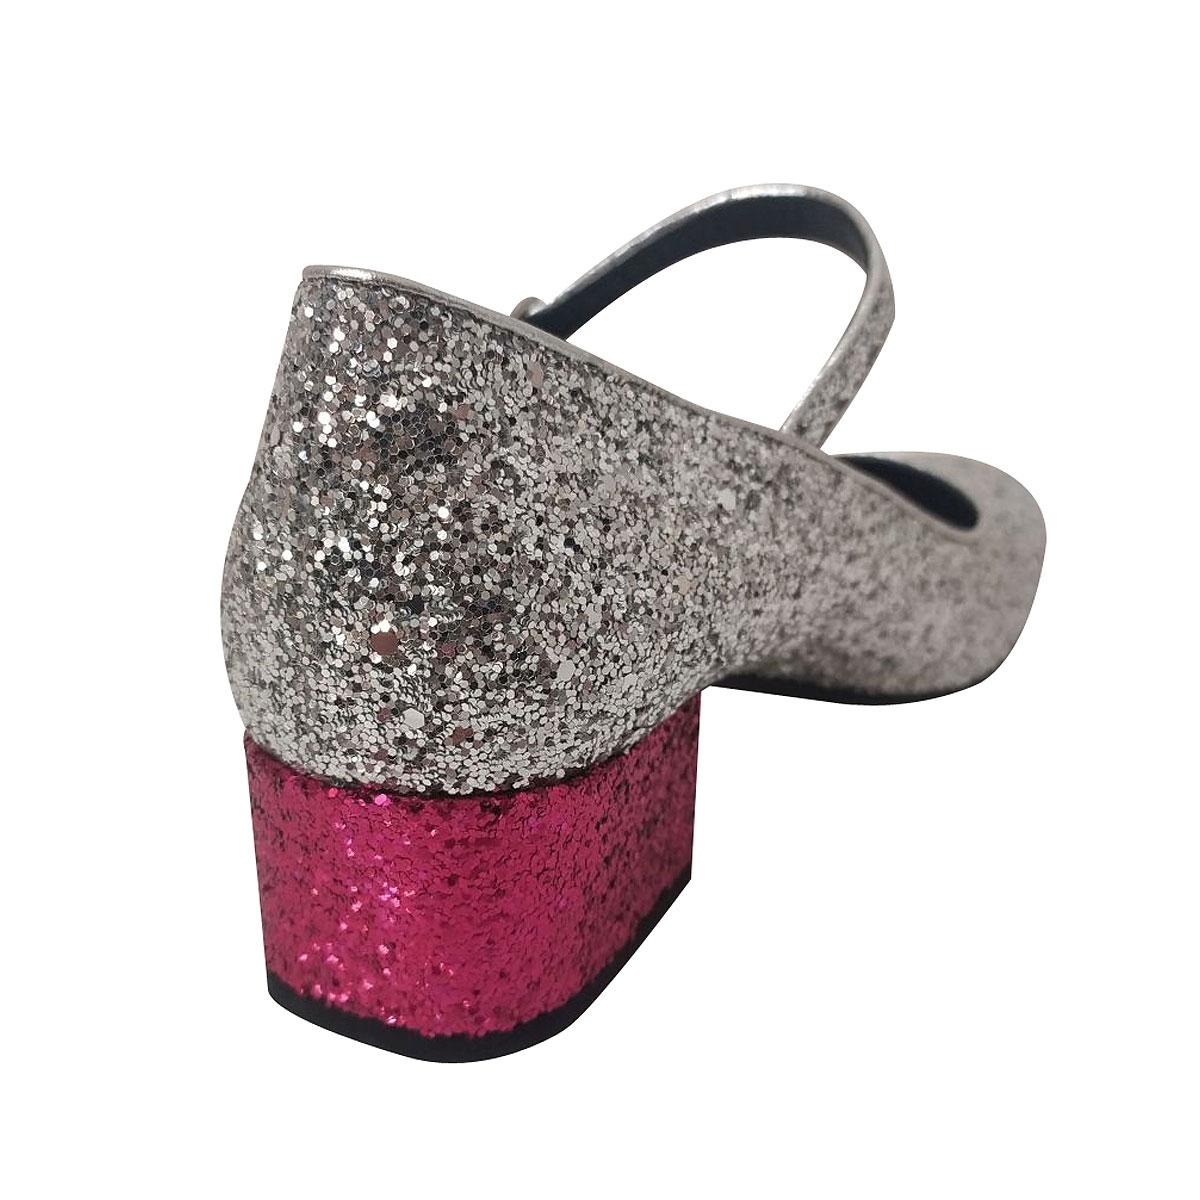 Amazing Saint Laurent shoes
Glitter and leather
Silver and fuchsia color
Single buckle closure
With box and dustbag
Heel height cm 4 (1,57 inches)
Worldwide express shipping included in the price !